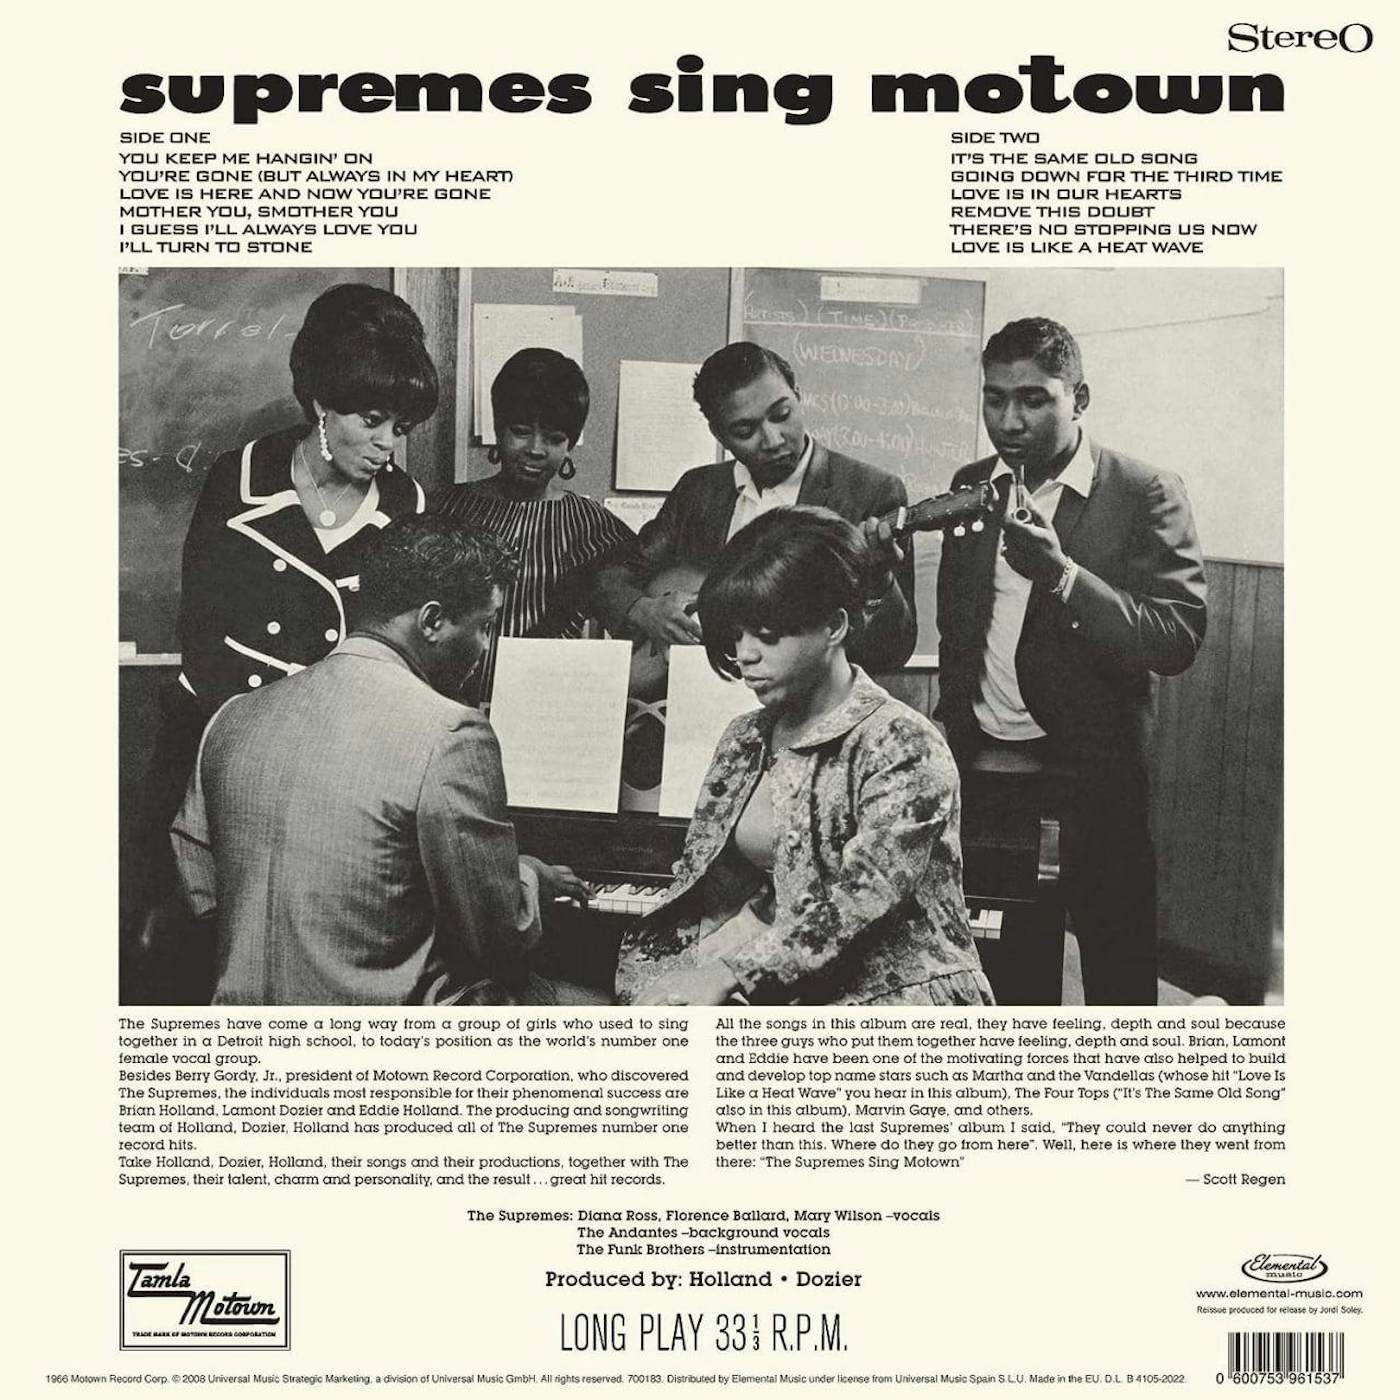 The Supremes SING MOTOWN Vinyl Record